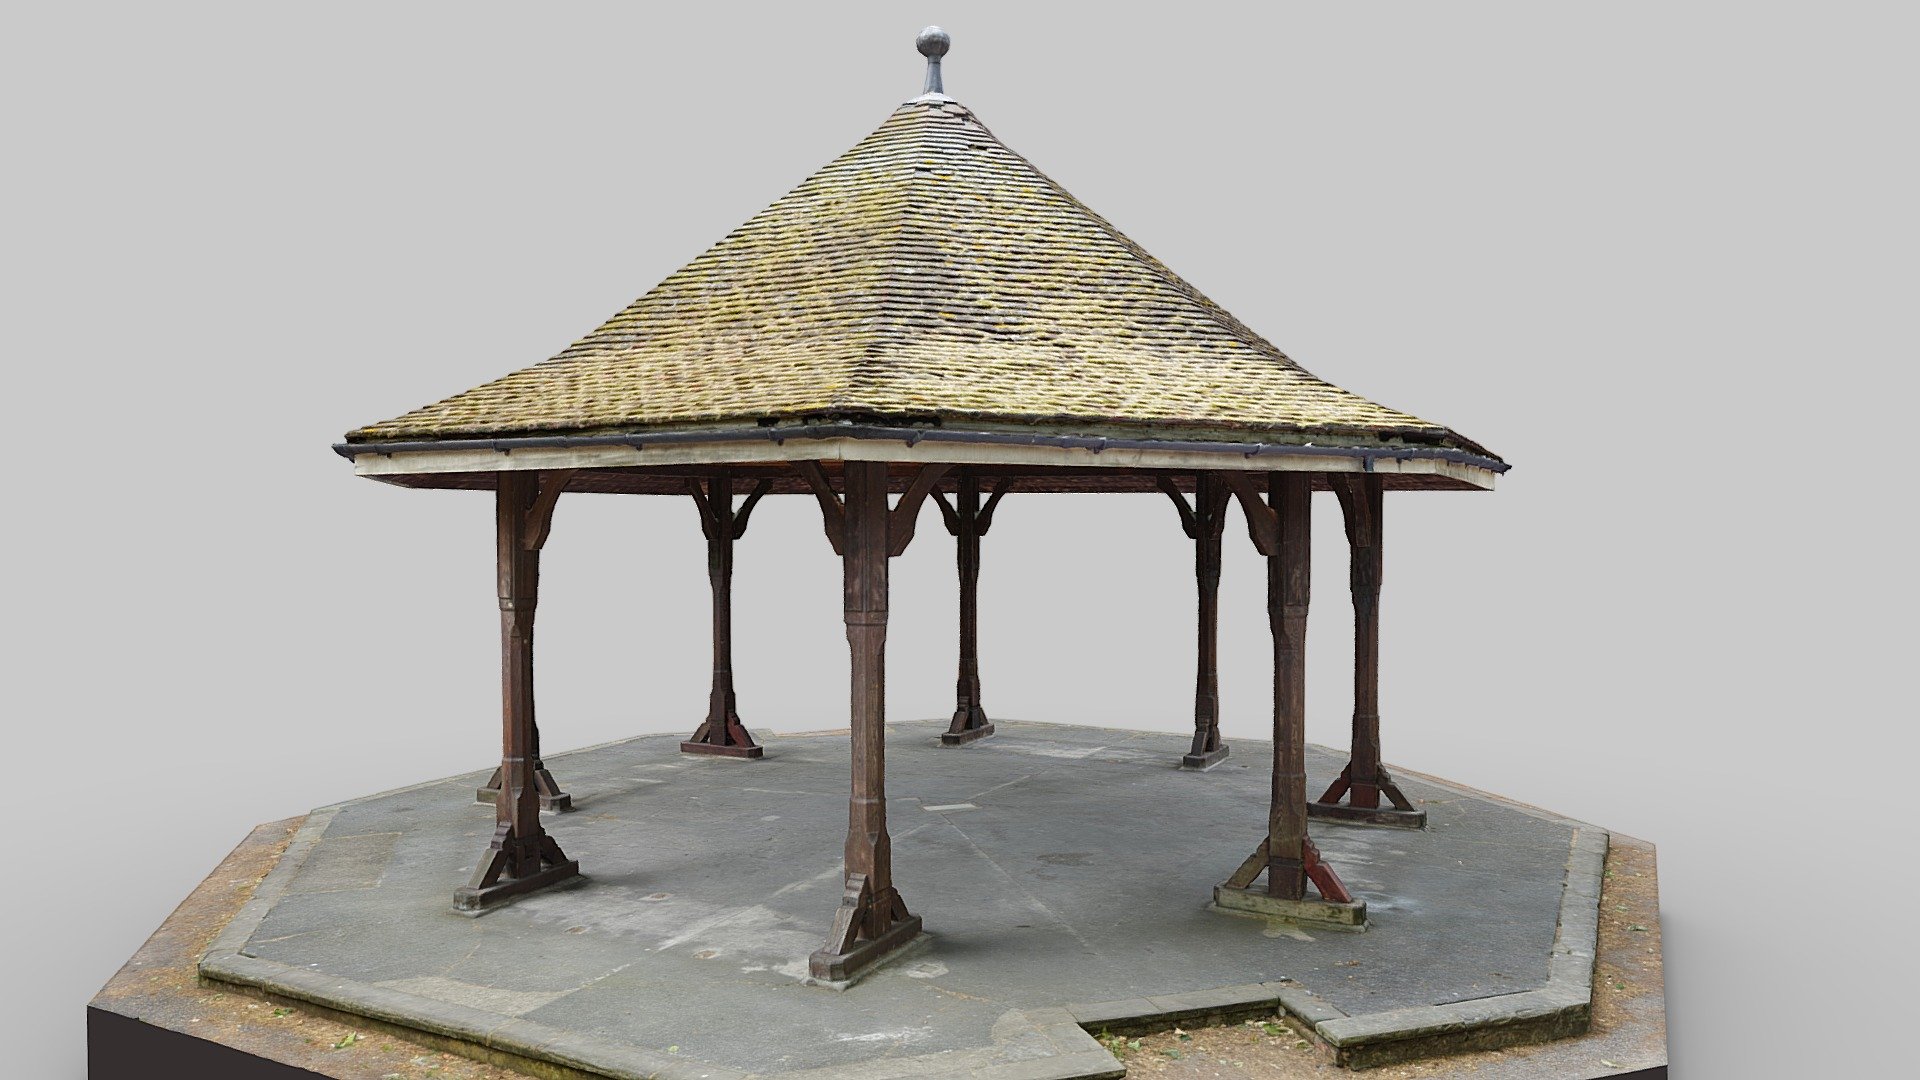 The band stand (octagonal pavilion) at the centre of Lincoln's Inn Fields, London.

1096 photos taken in June 2023 with a Sony a7R III and processed in Reality Capture.
Textures: 2 of 8192x8192 pixels diffuse 3d model